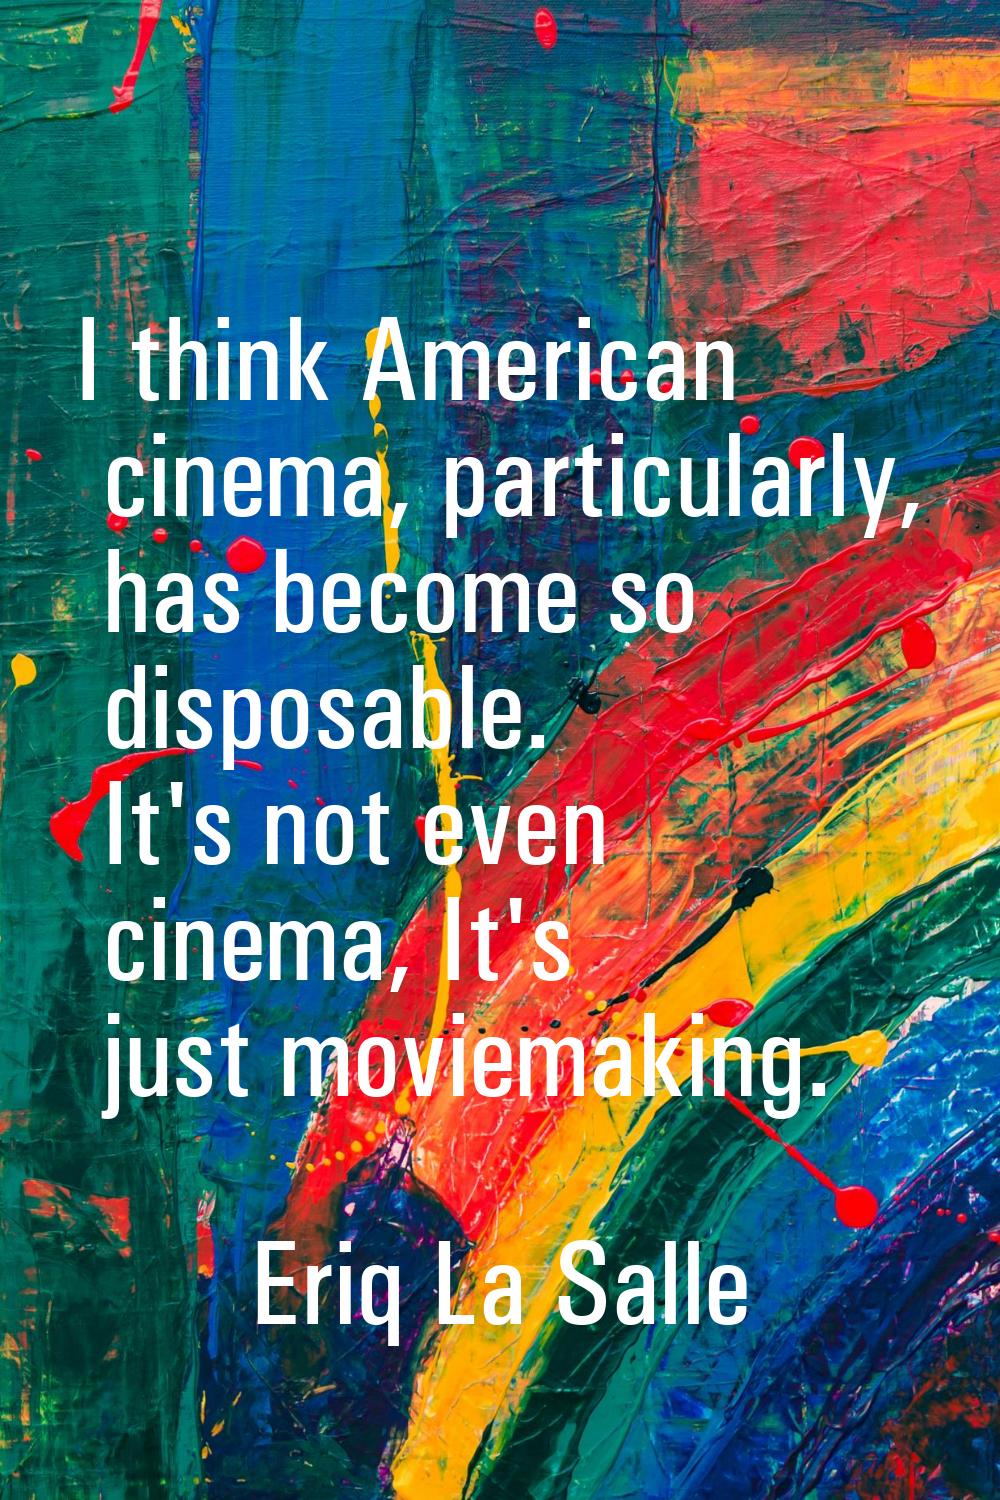 I think American cinema, particularly, has become so disposable. It's not even cinema, It's just mo